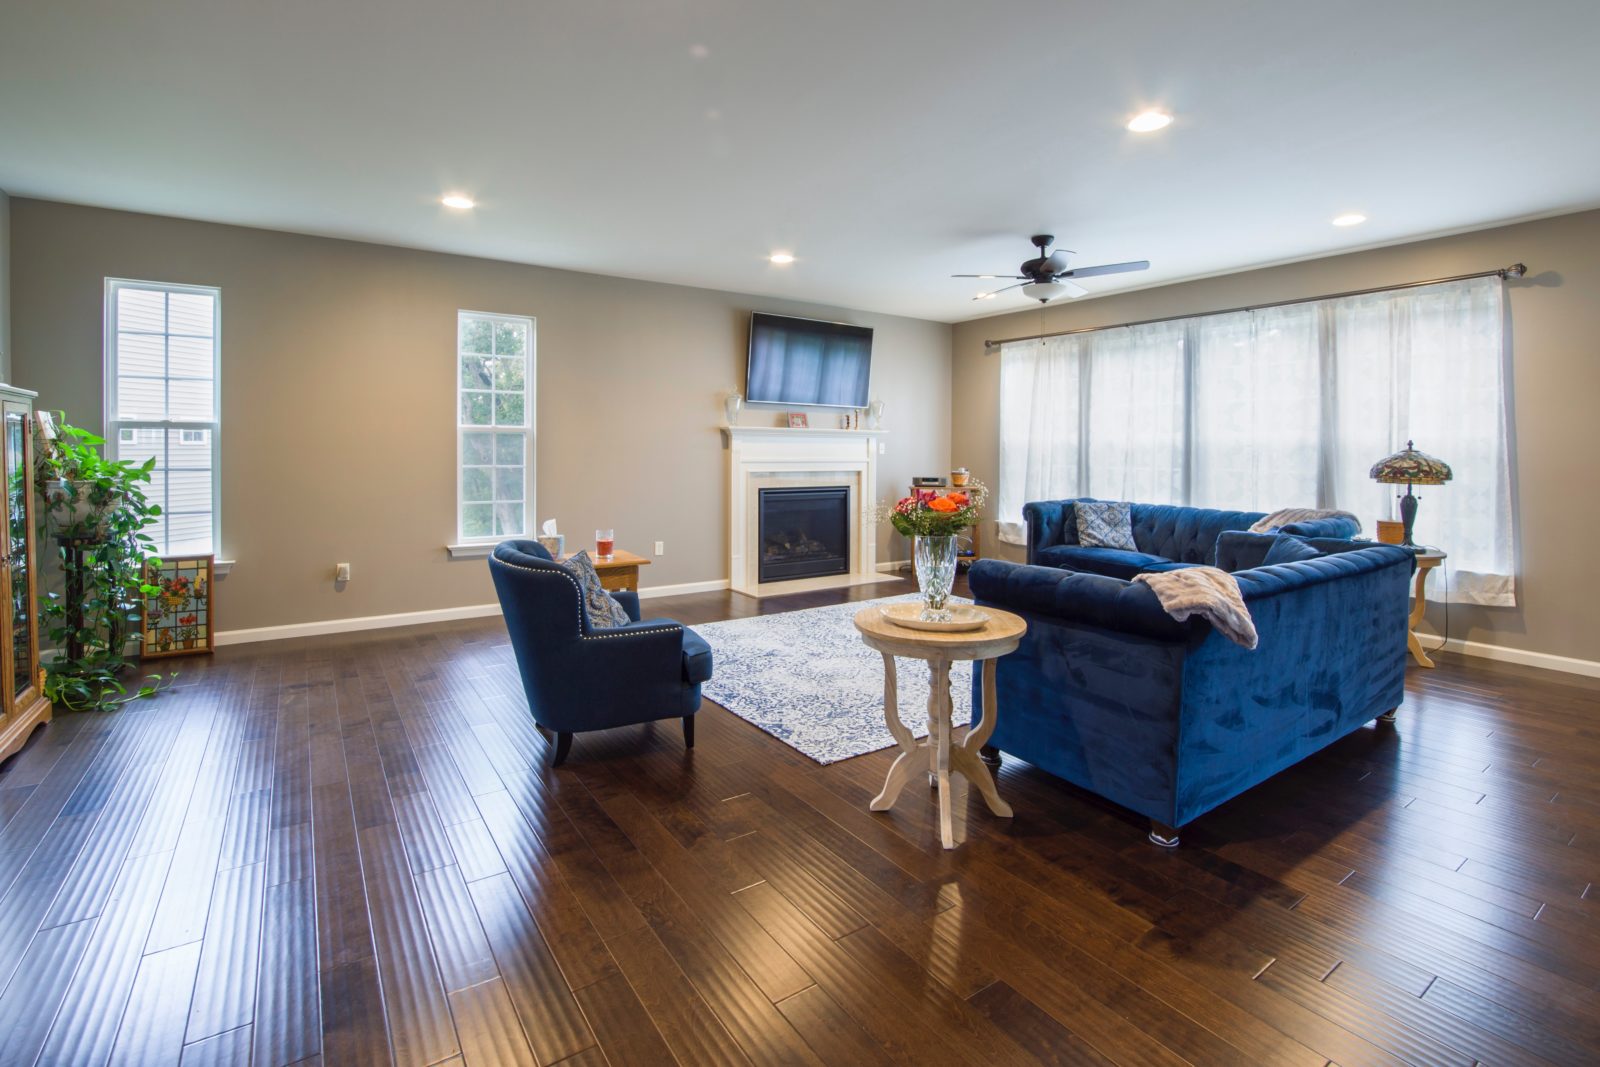 Learn how to choose the right flooring for each room of your custom home.